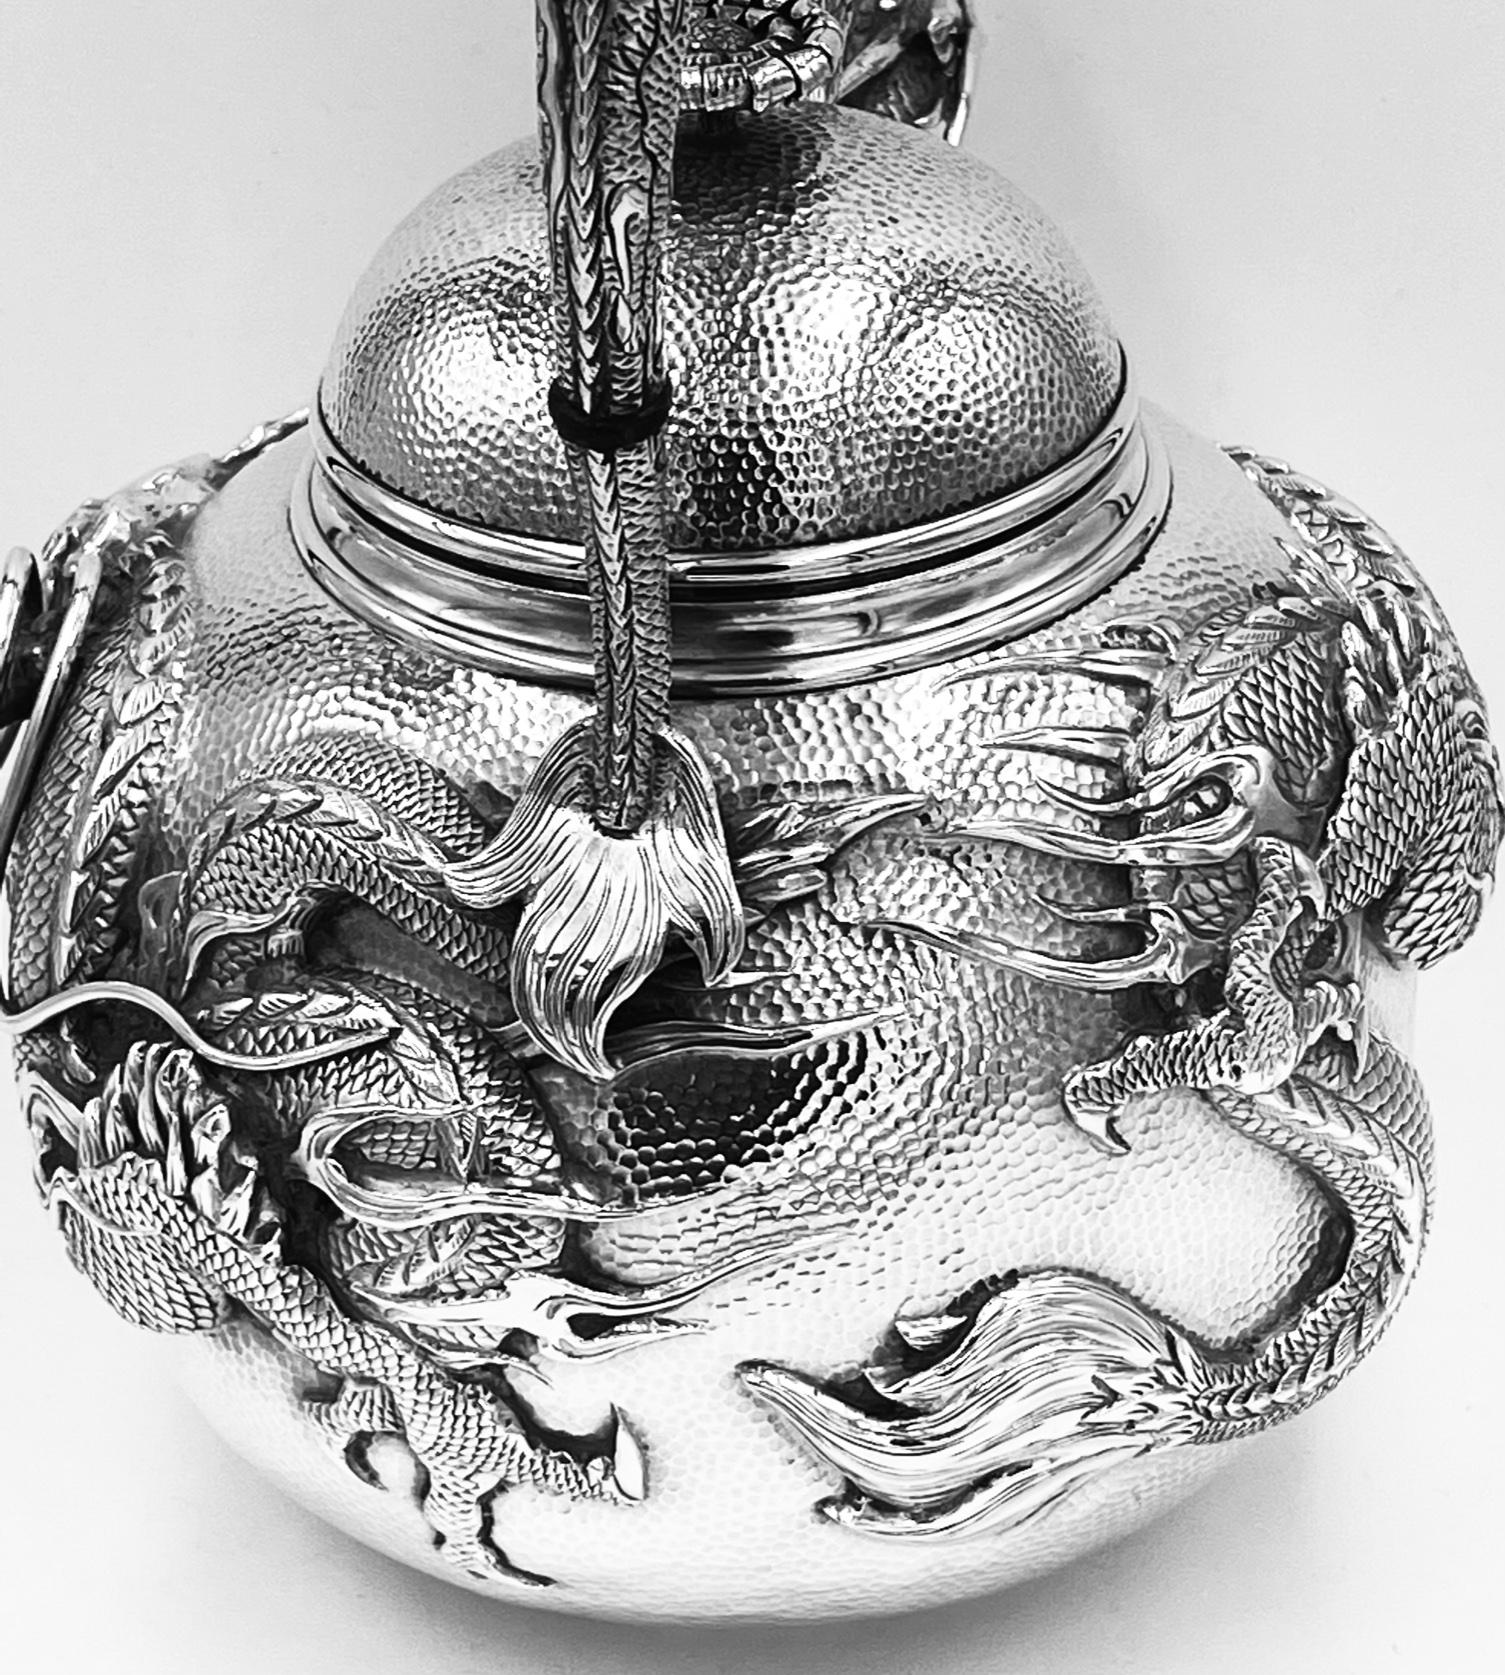 Japanese Silver Meijii Period Tea Kettle with Entwined Dragons Handle 1